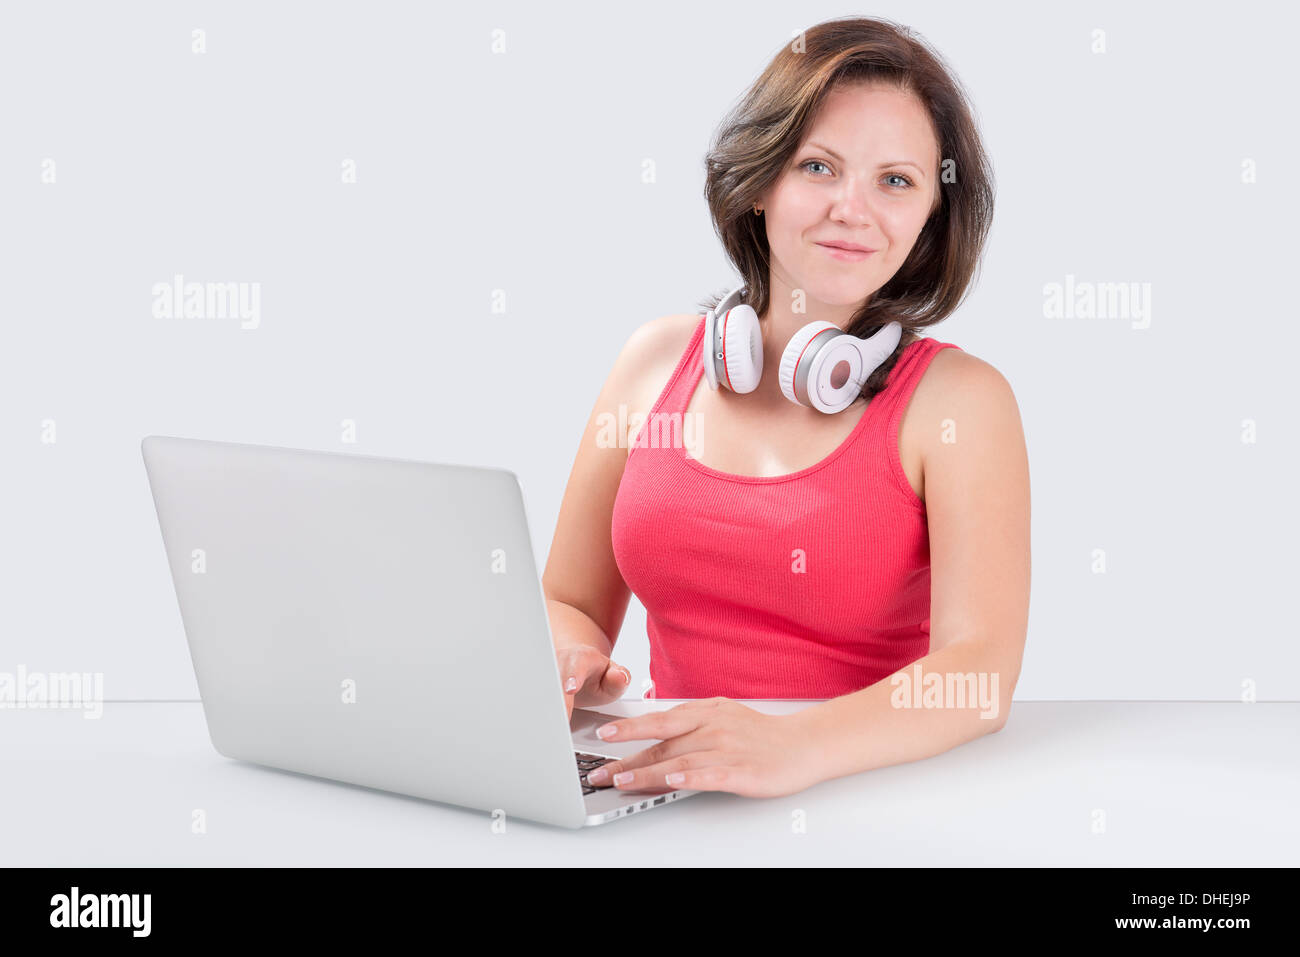 Young woman is sitting in front of laptop with bluetooth headphones on her neck and looking at the camera Stock Photo